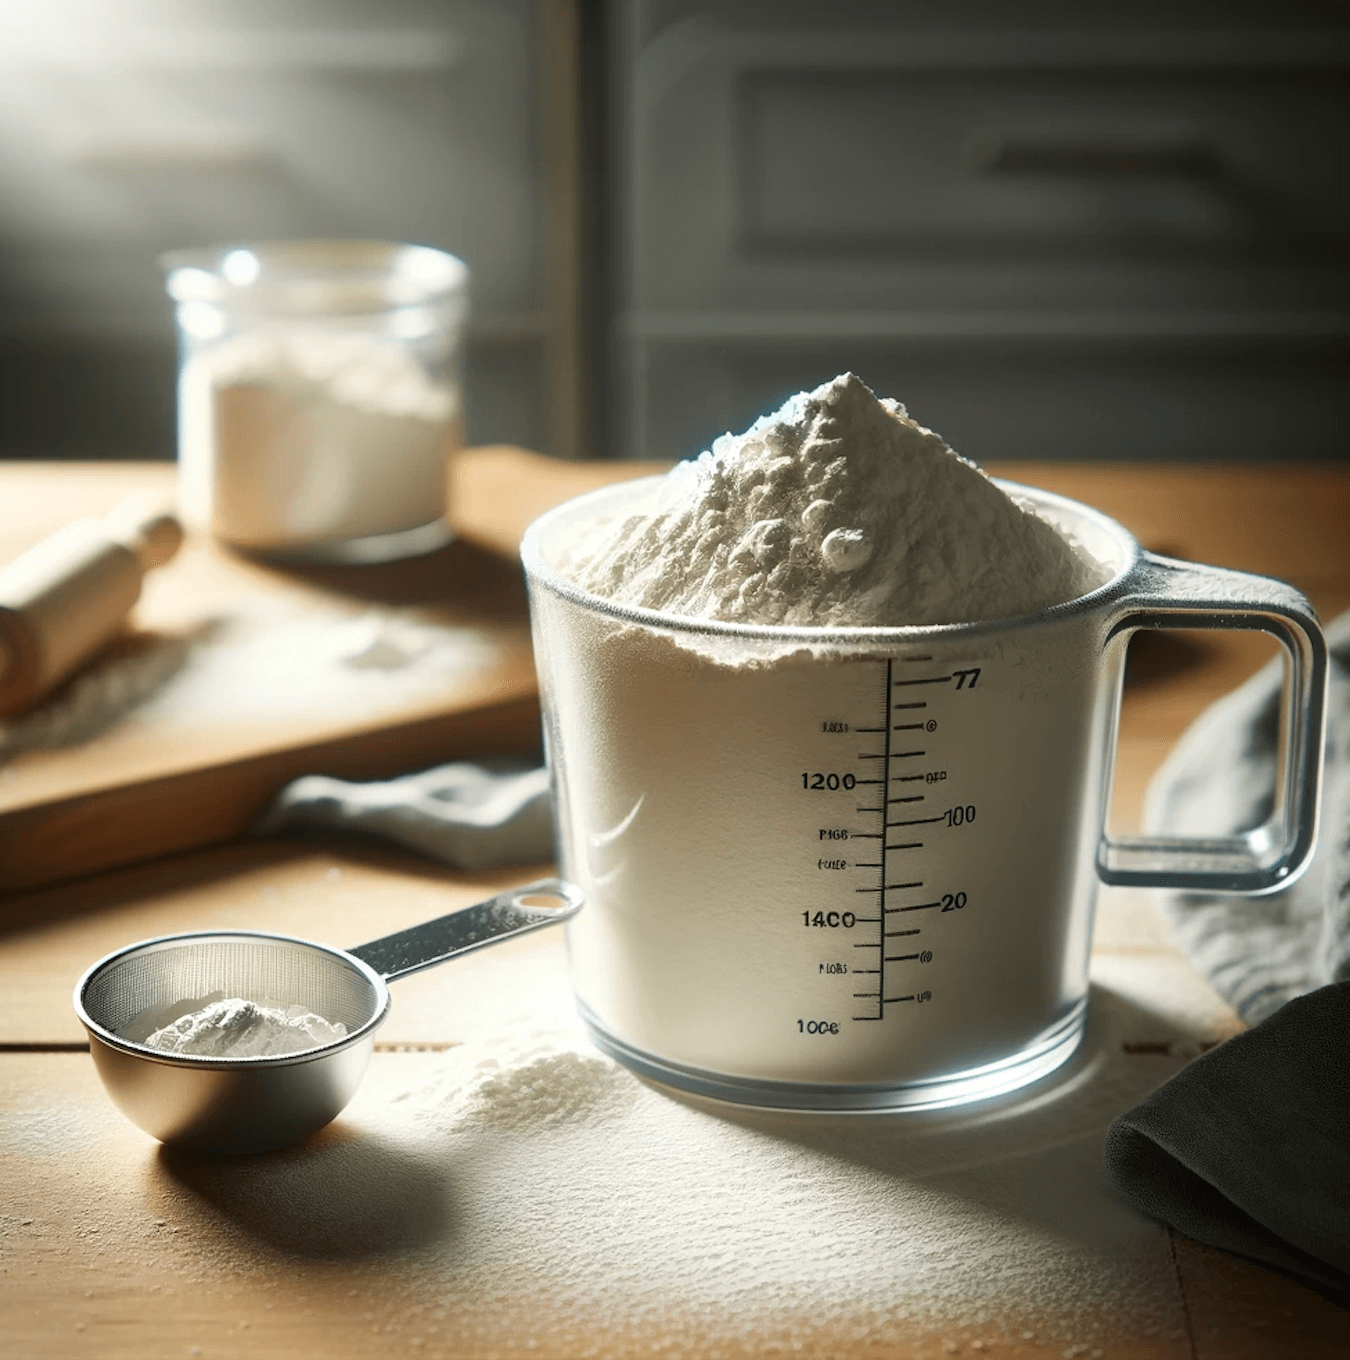 900 grams of flour in cups